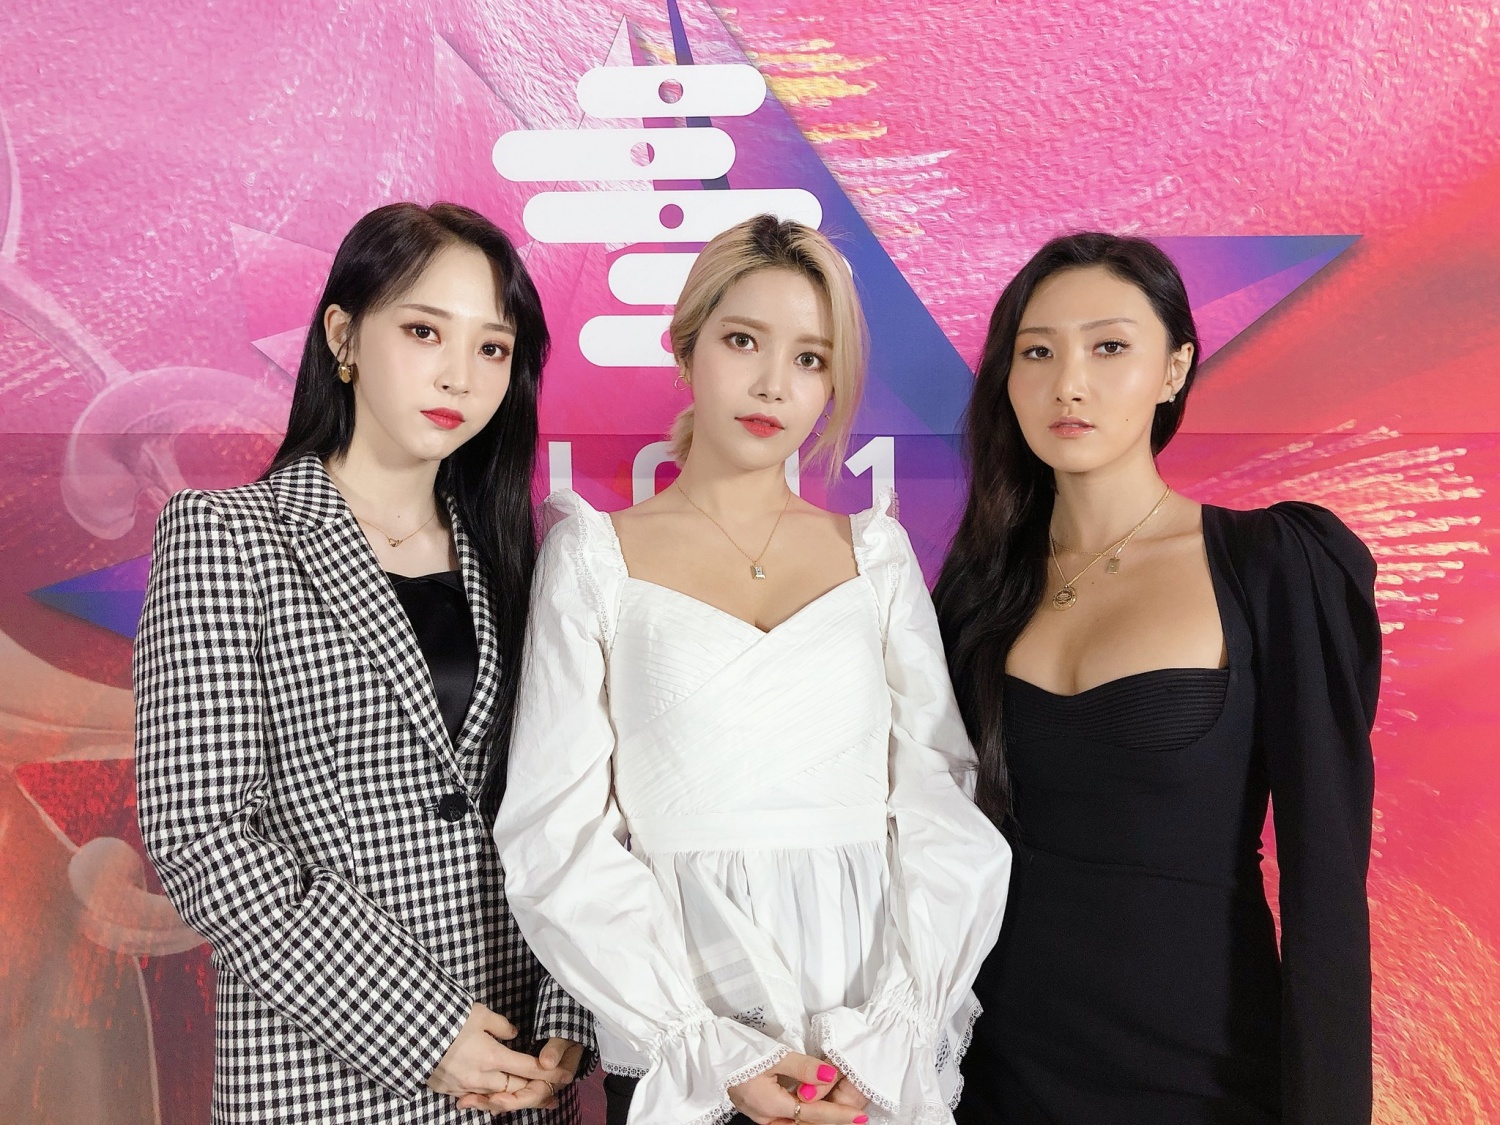 MAMAMOO Wheein Didn’t Attend The Seoul Music Awards Due To Flu